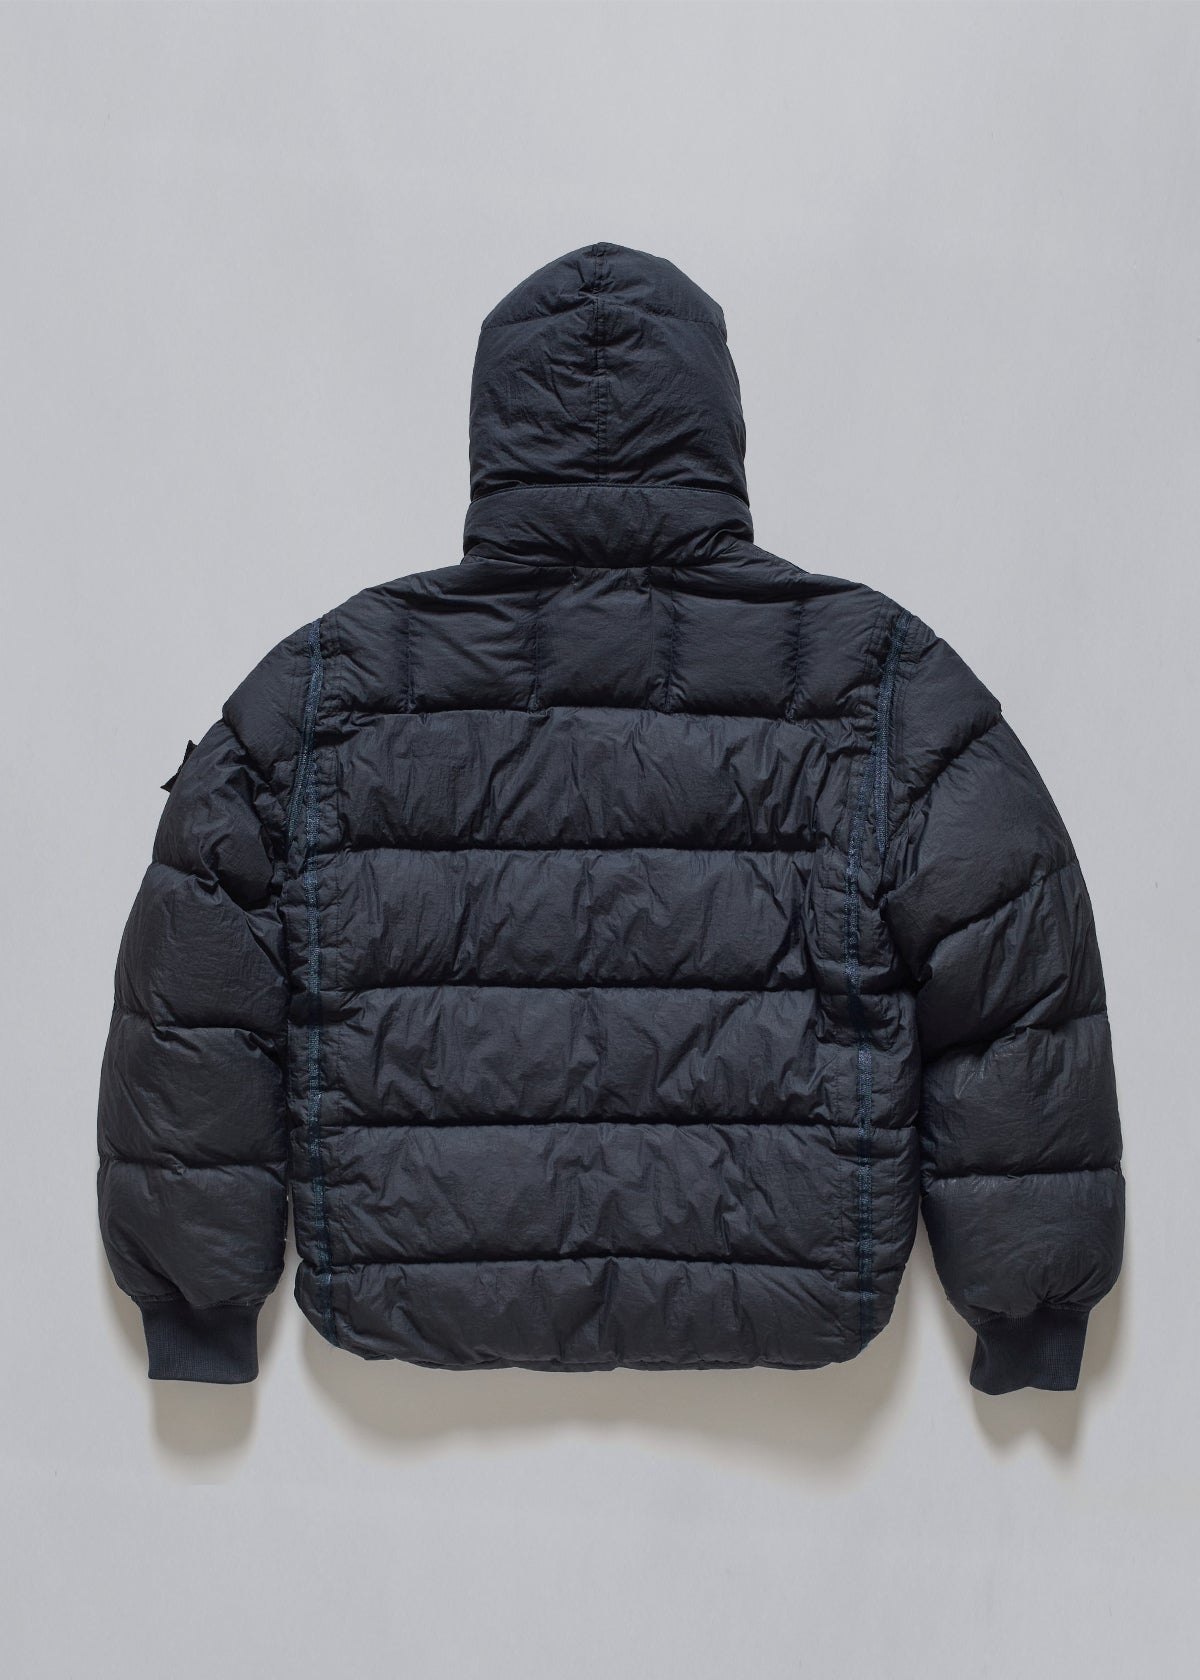 Navy Goose Down Jacket 2010's - Large - The Archivist Store